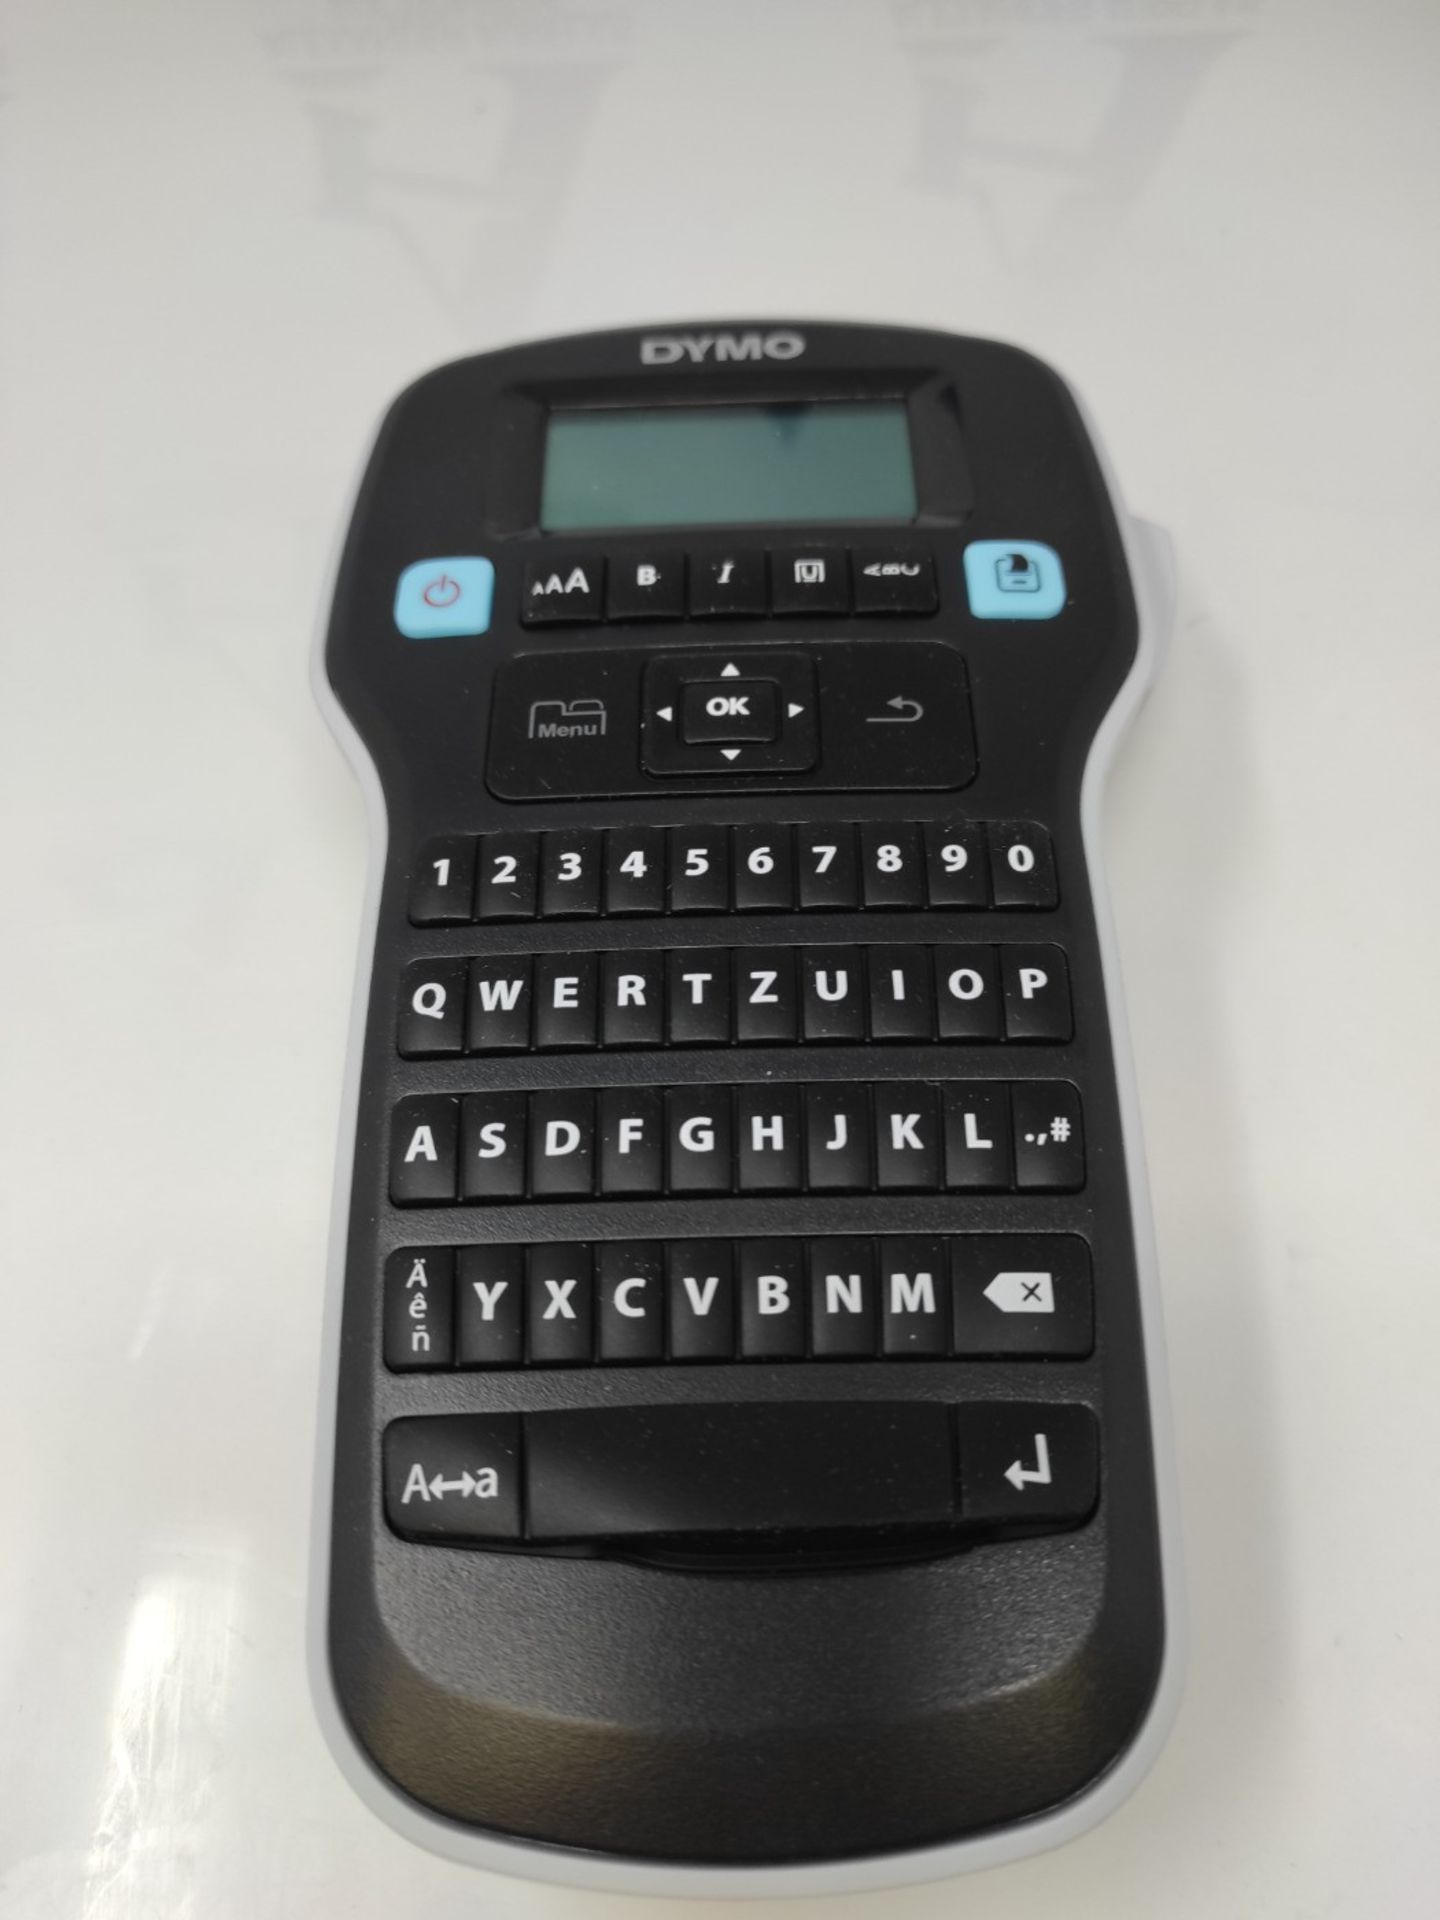 DYMO LabelManager 160 Portable Labeling Device | Labeling device with QWERTZ keyboard - Image 3 of 6